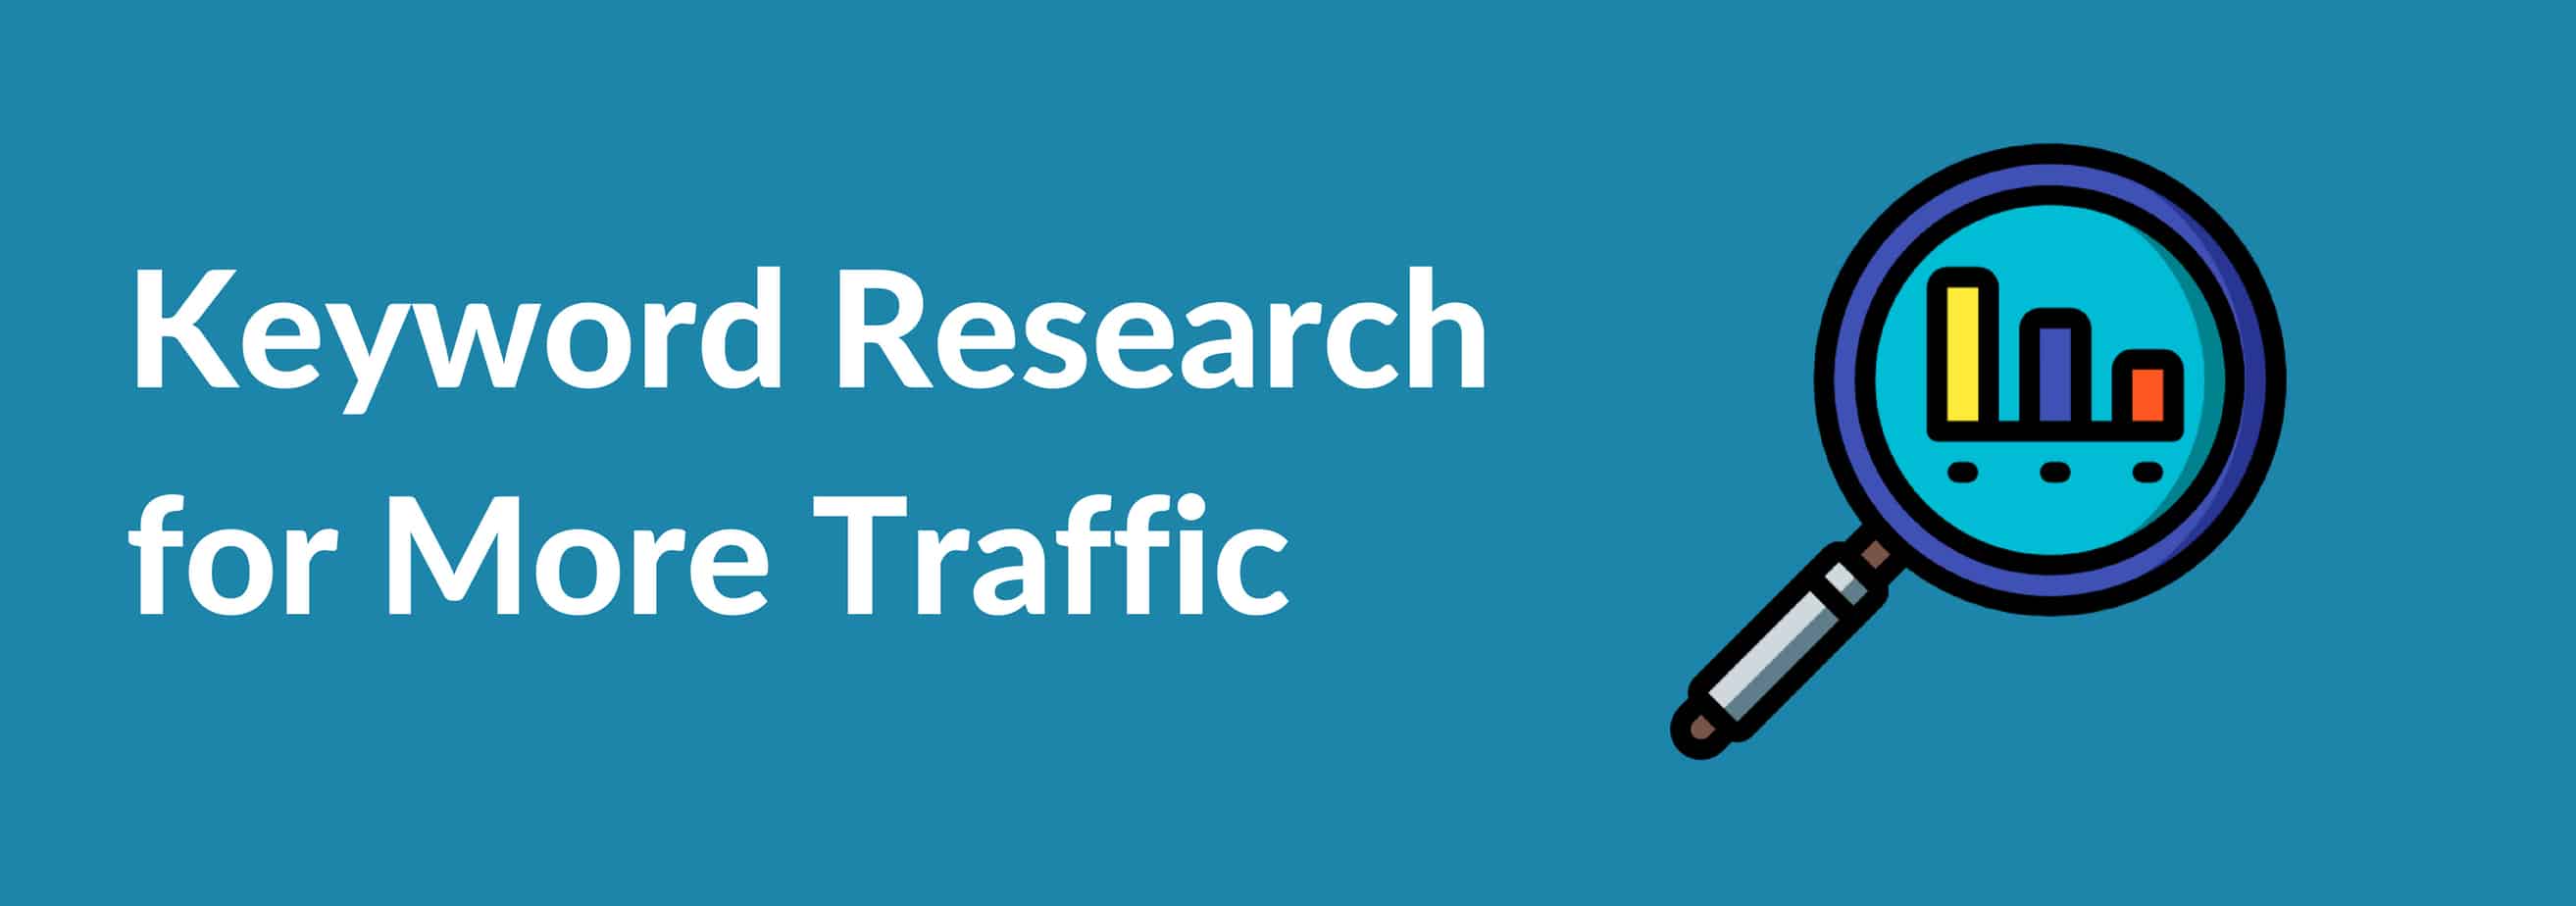 Keyword Research for More Traffic